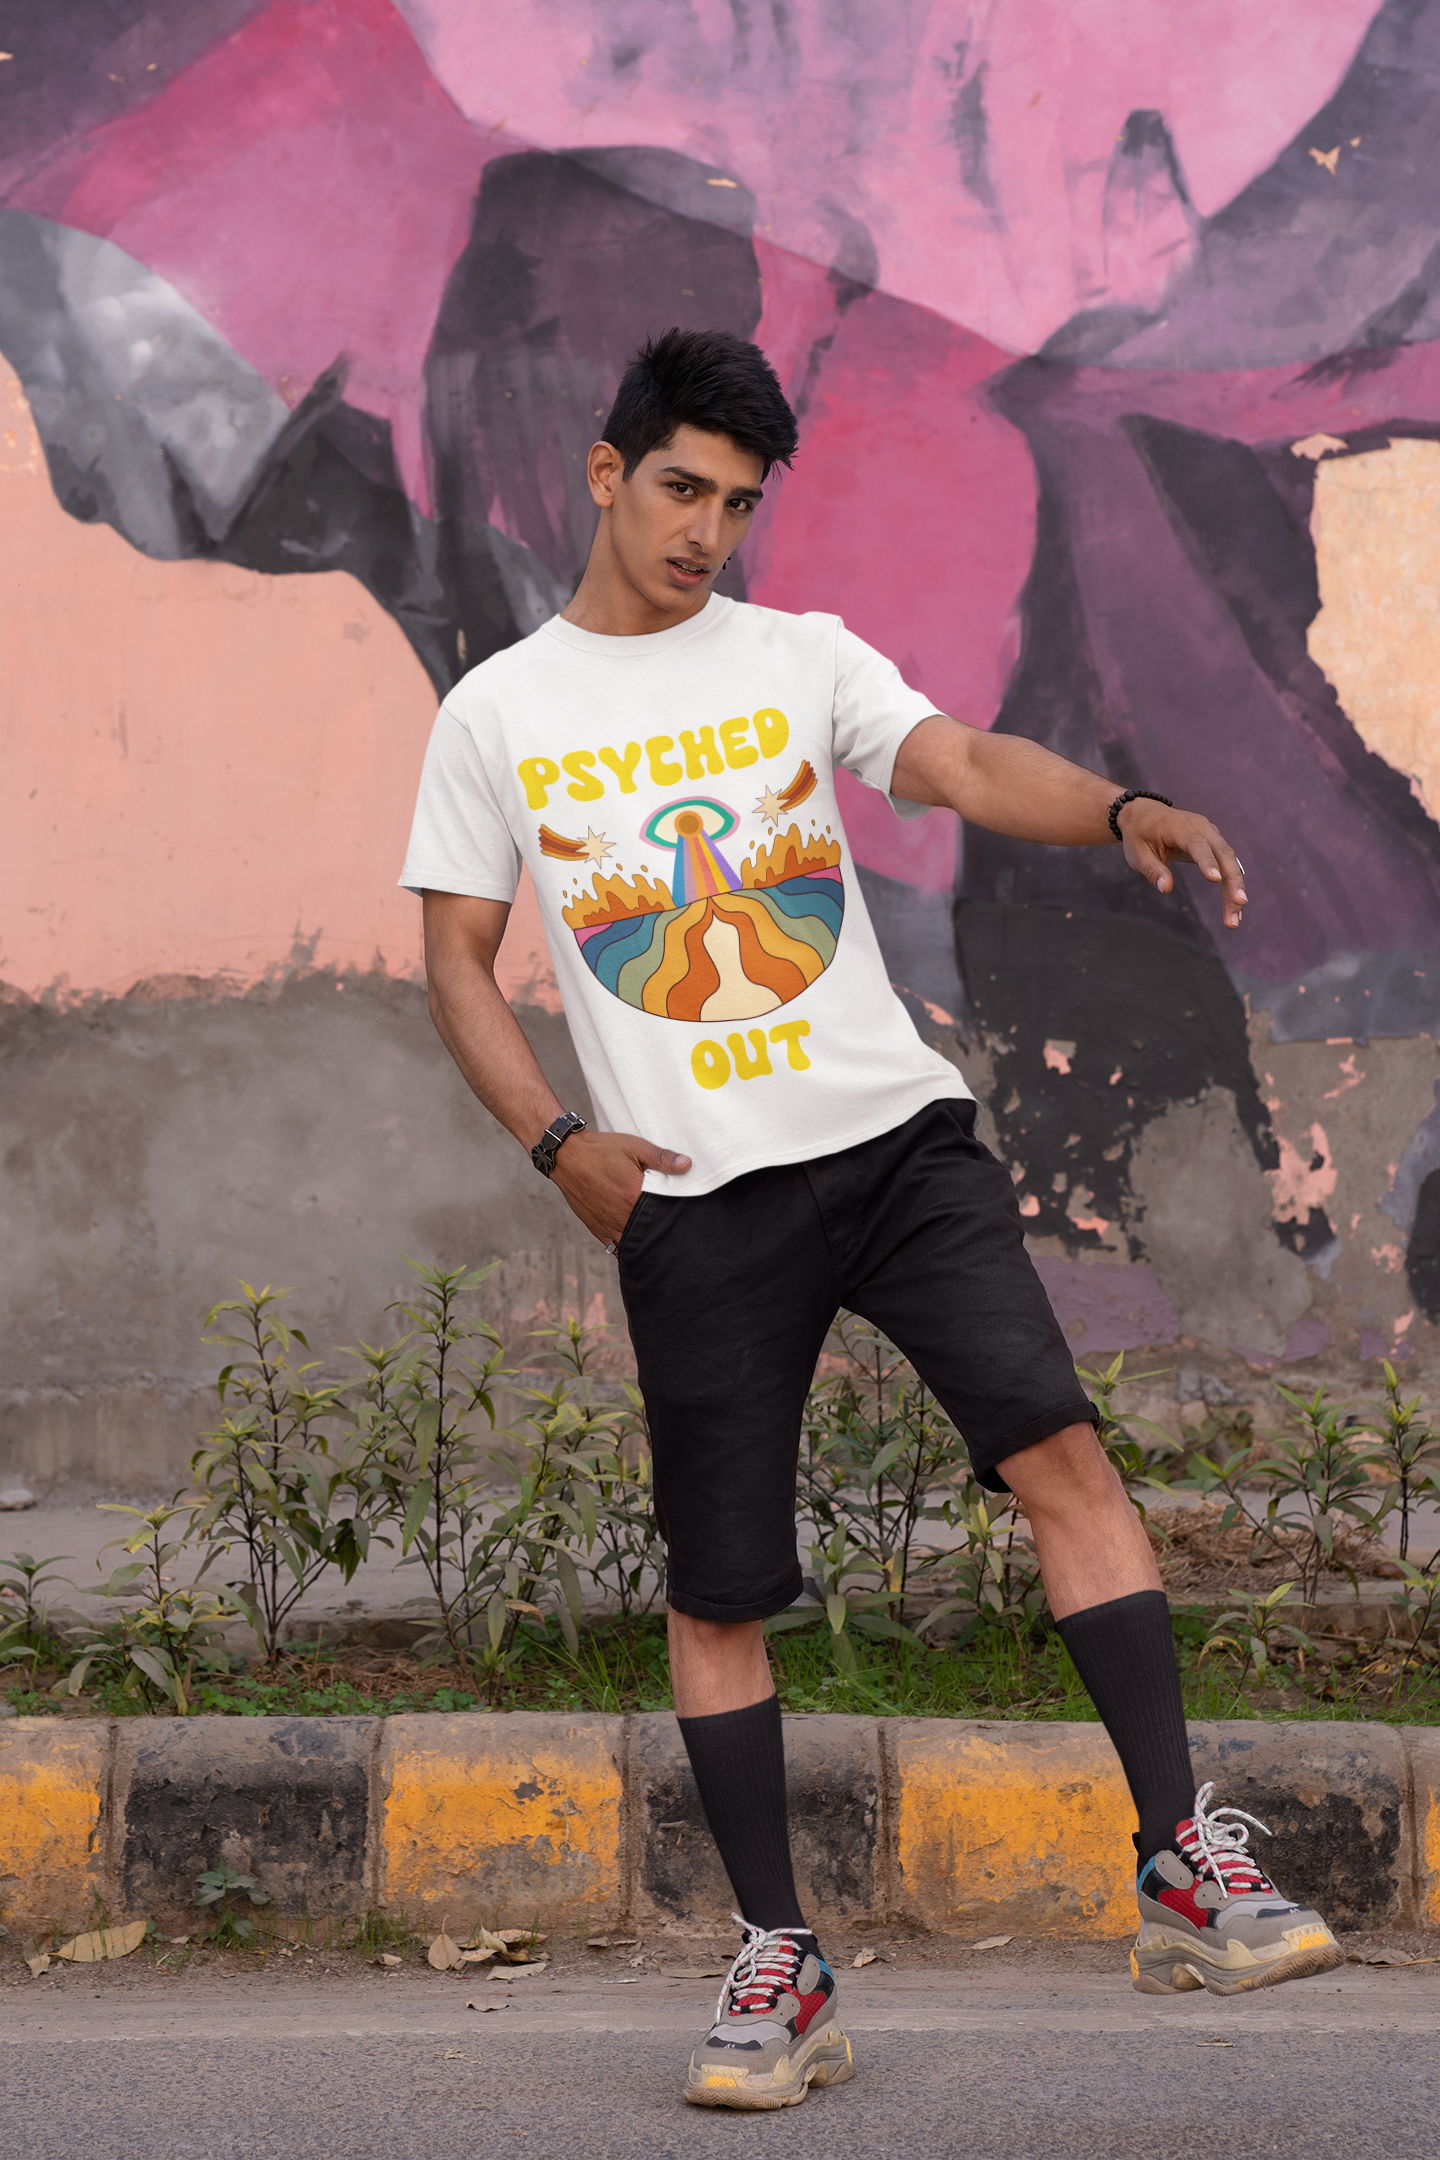 Psyched Out Unisex T-shirt